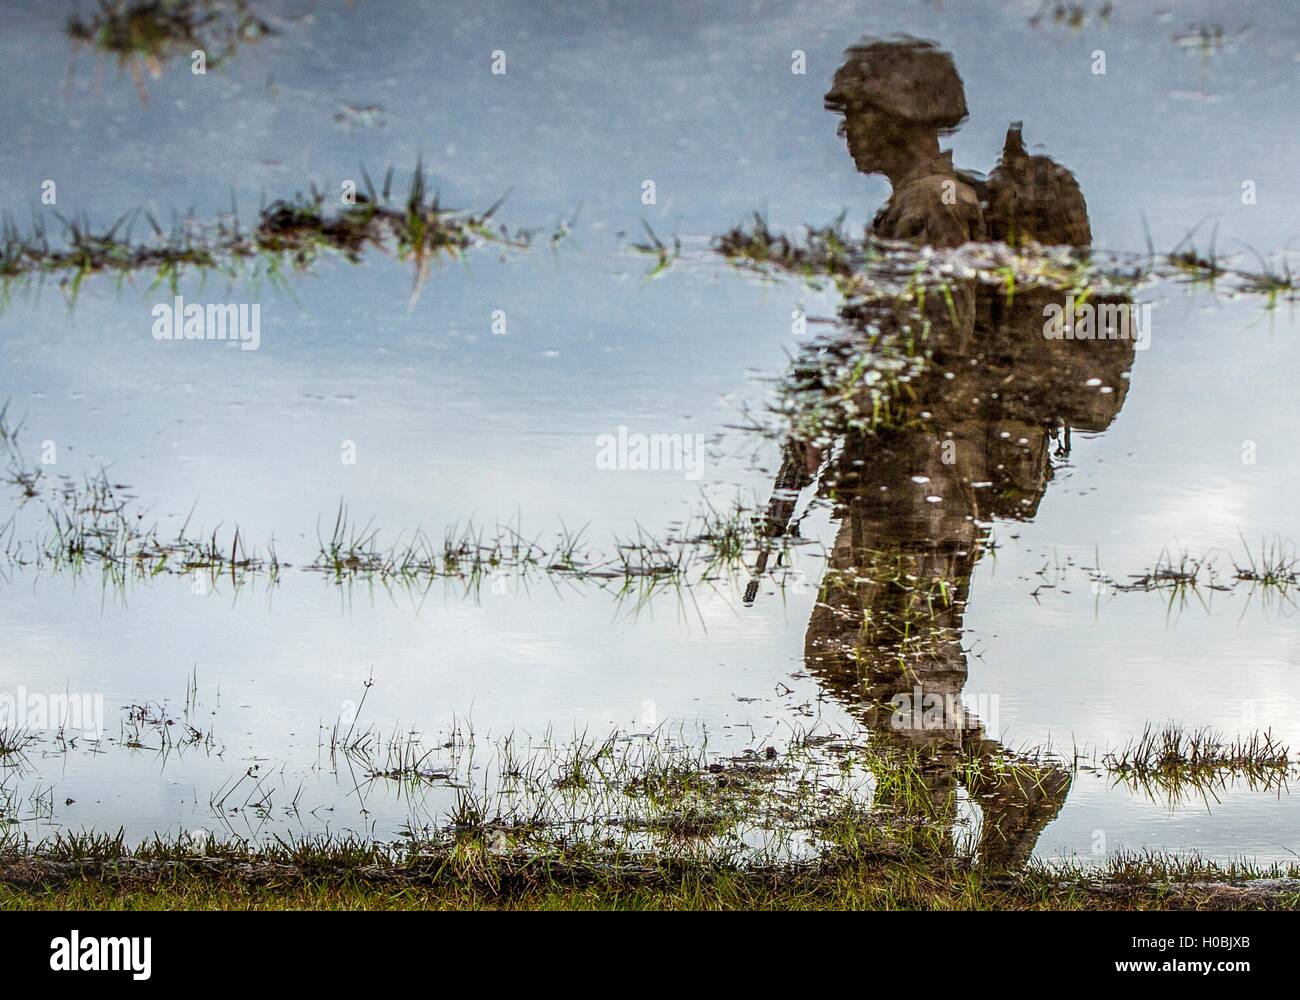 Reflection in the water of U.S. Marine recruit marching during tactical training at the Marine Corps Recruit Depot December 3, 2015 in Parris Island, South Carolina. Stock Photo